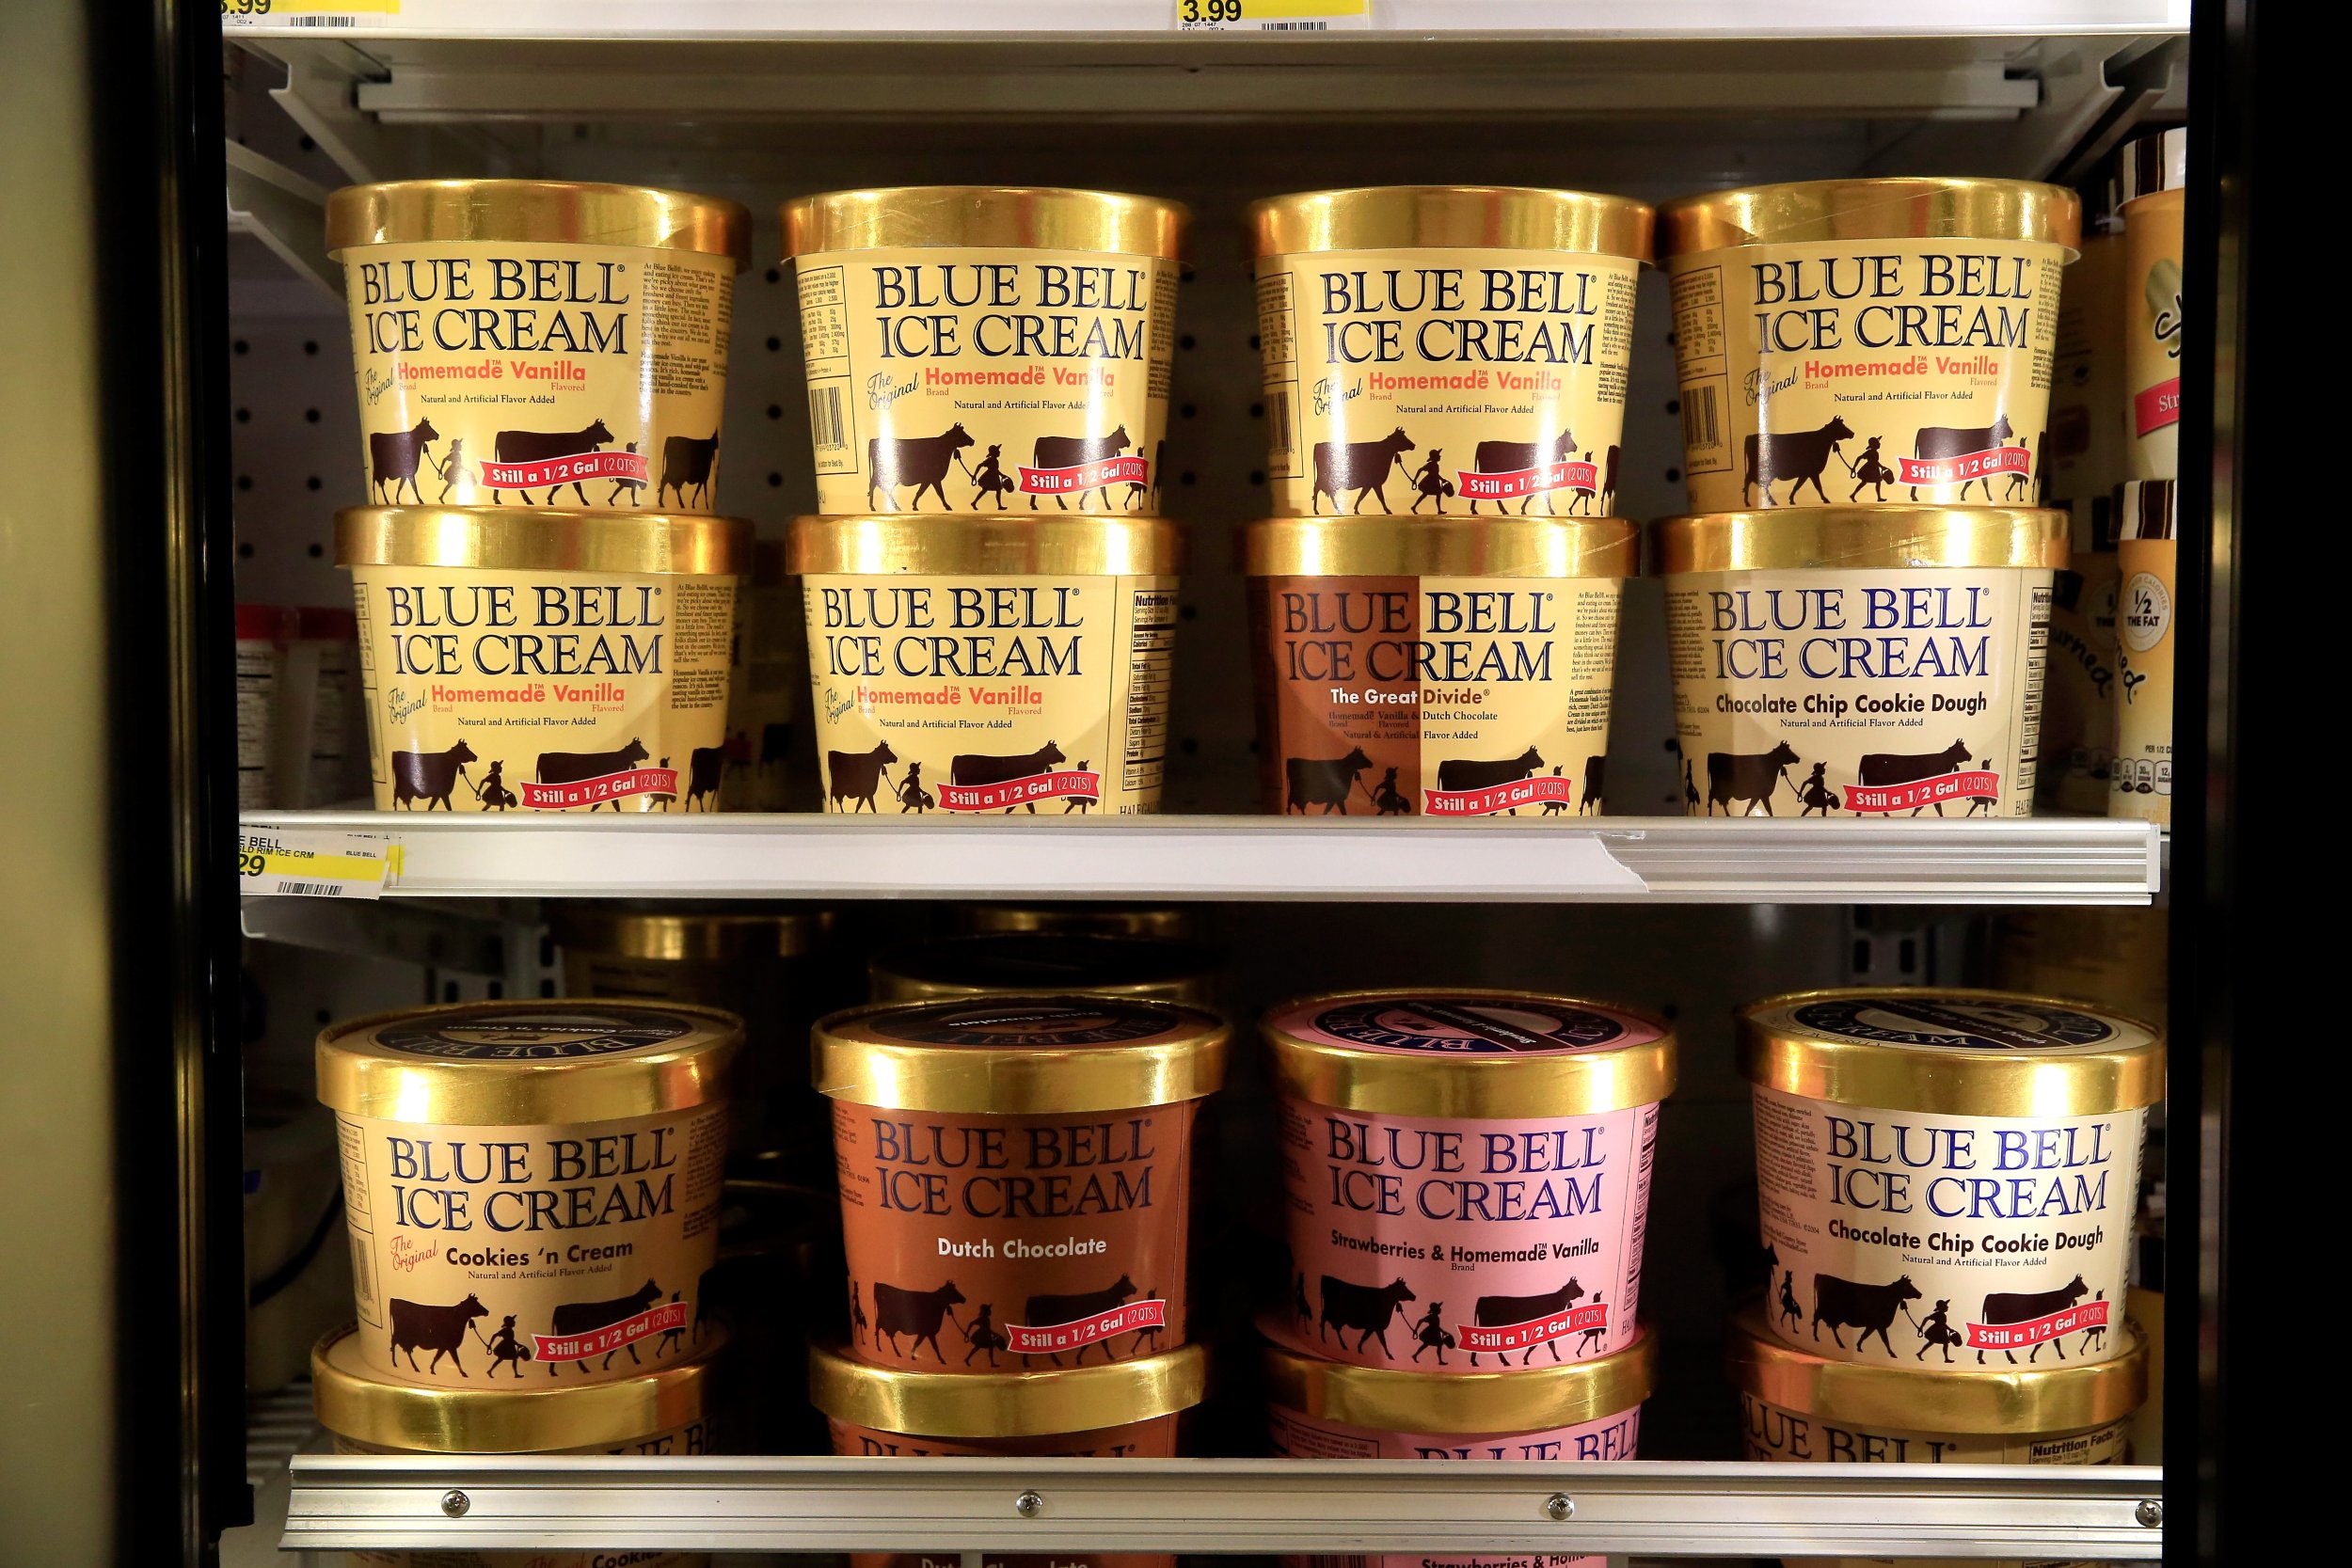 Blue Bell Listeria Outbreak 2015 Contaminated Ice Cream Still Poses Danger Cdc Warns After 2454